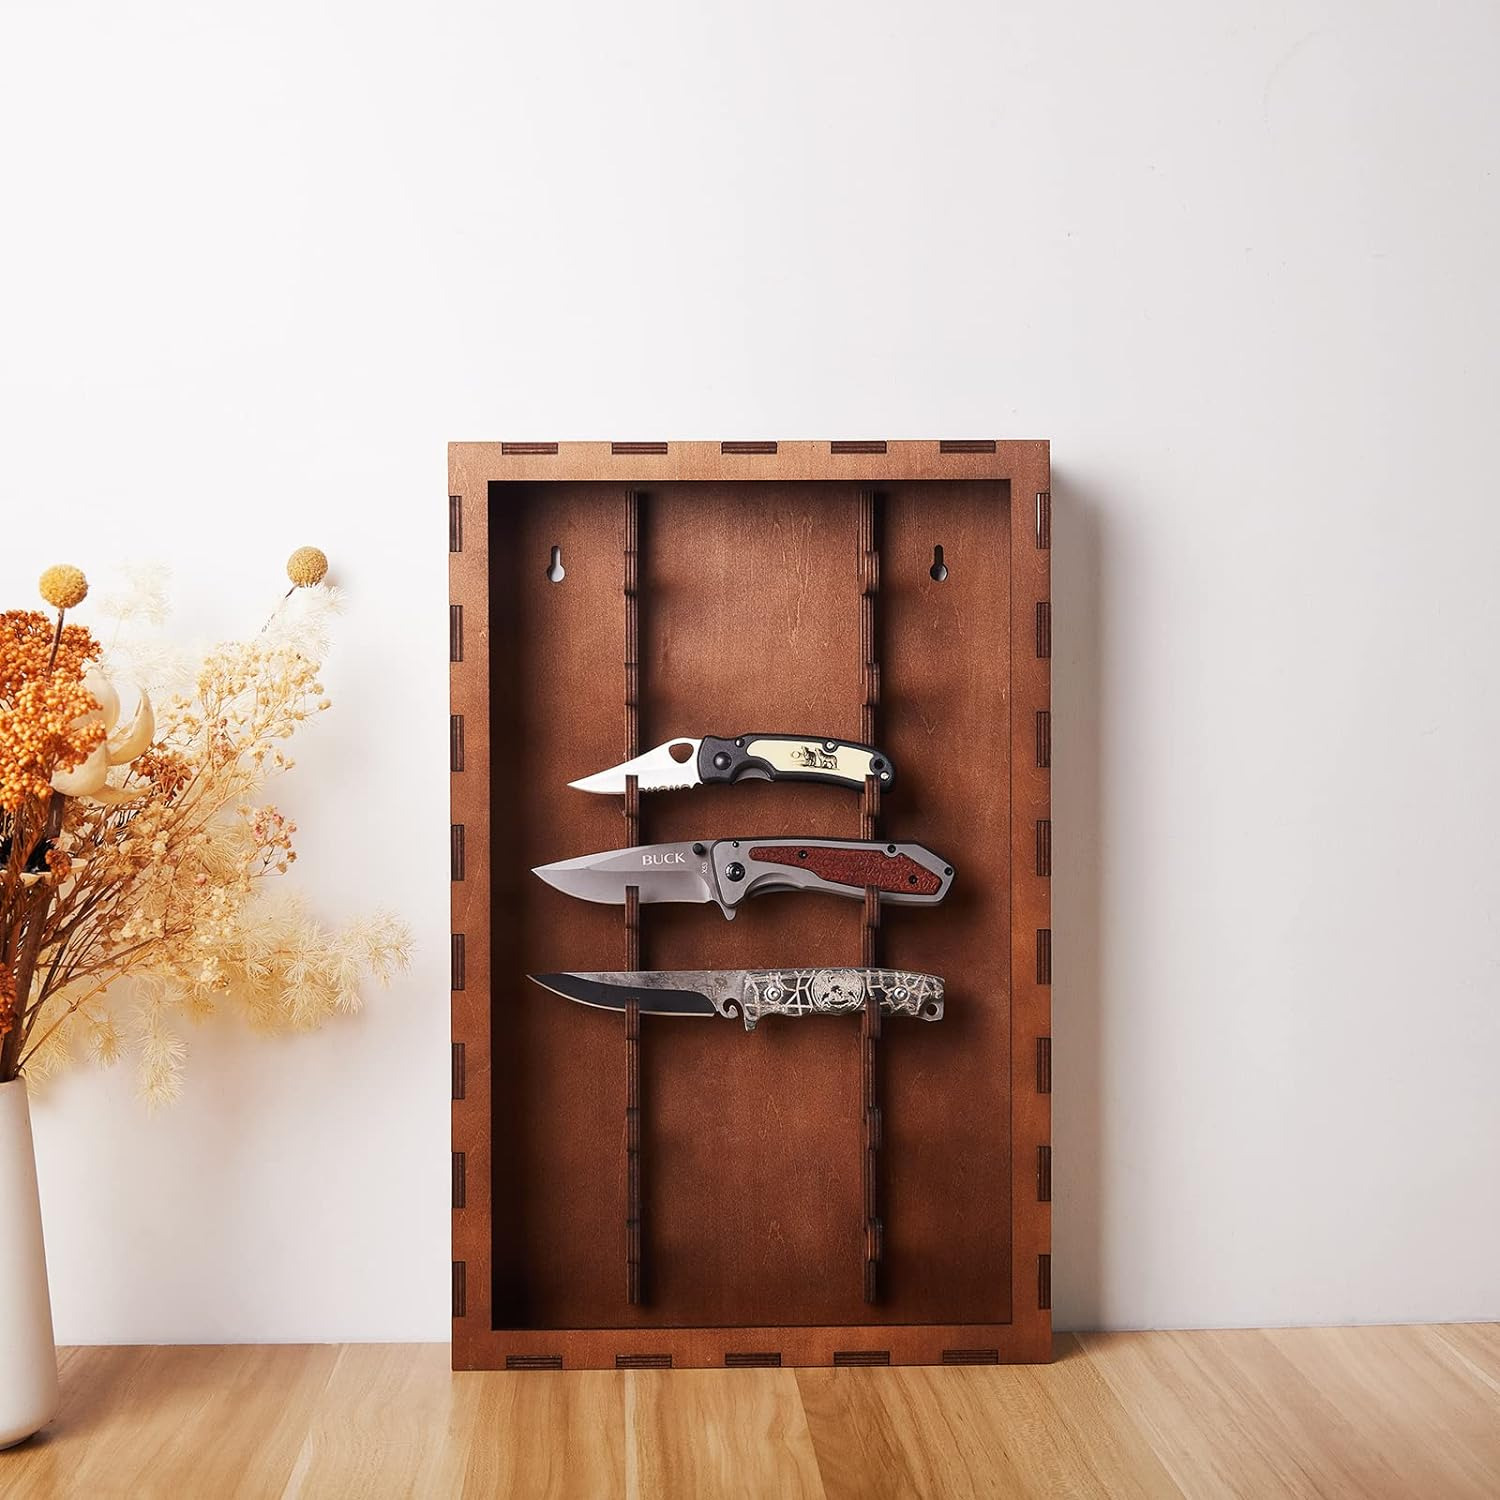 Pocket Knife Display Case - Knife Stand for Collections -Pocketshelf - Rustic